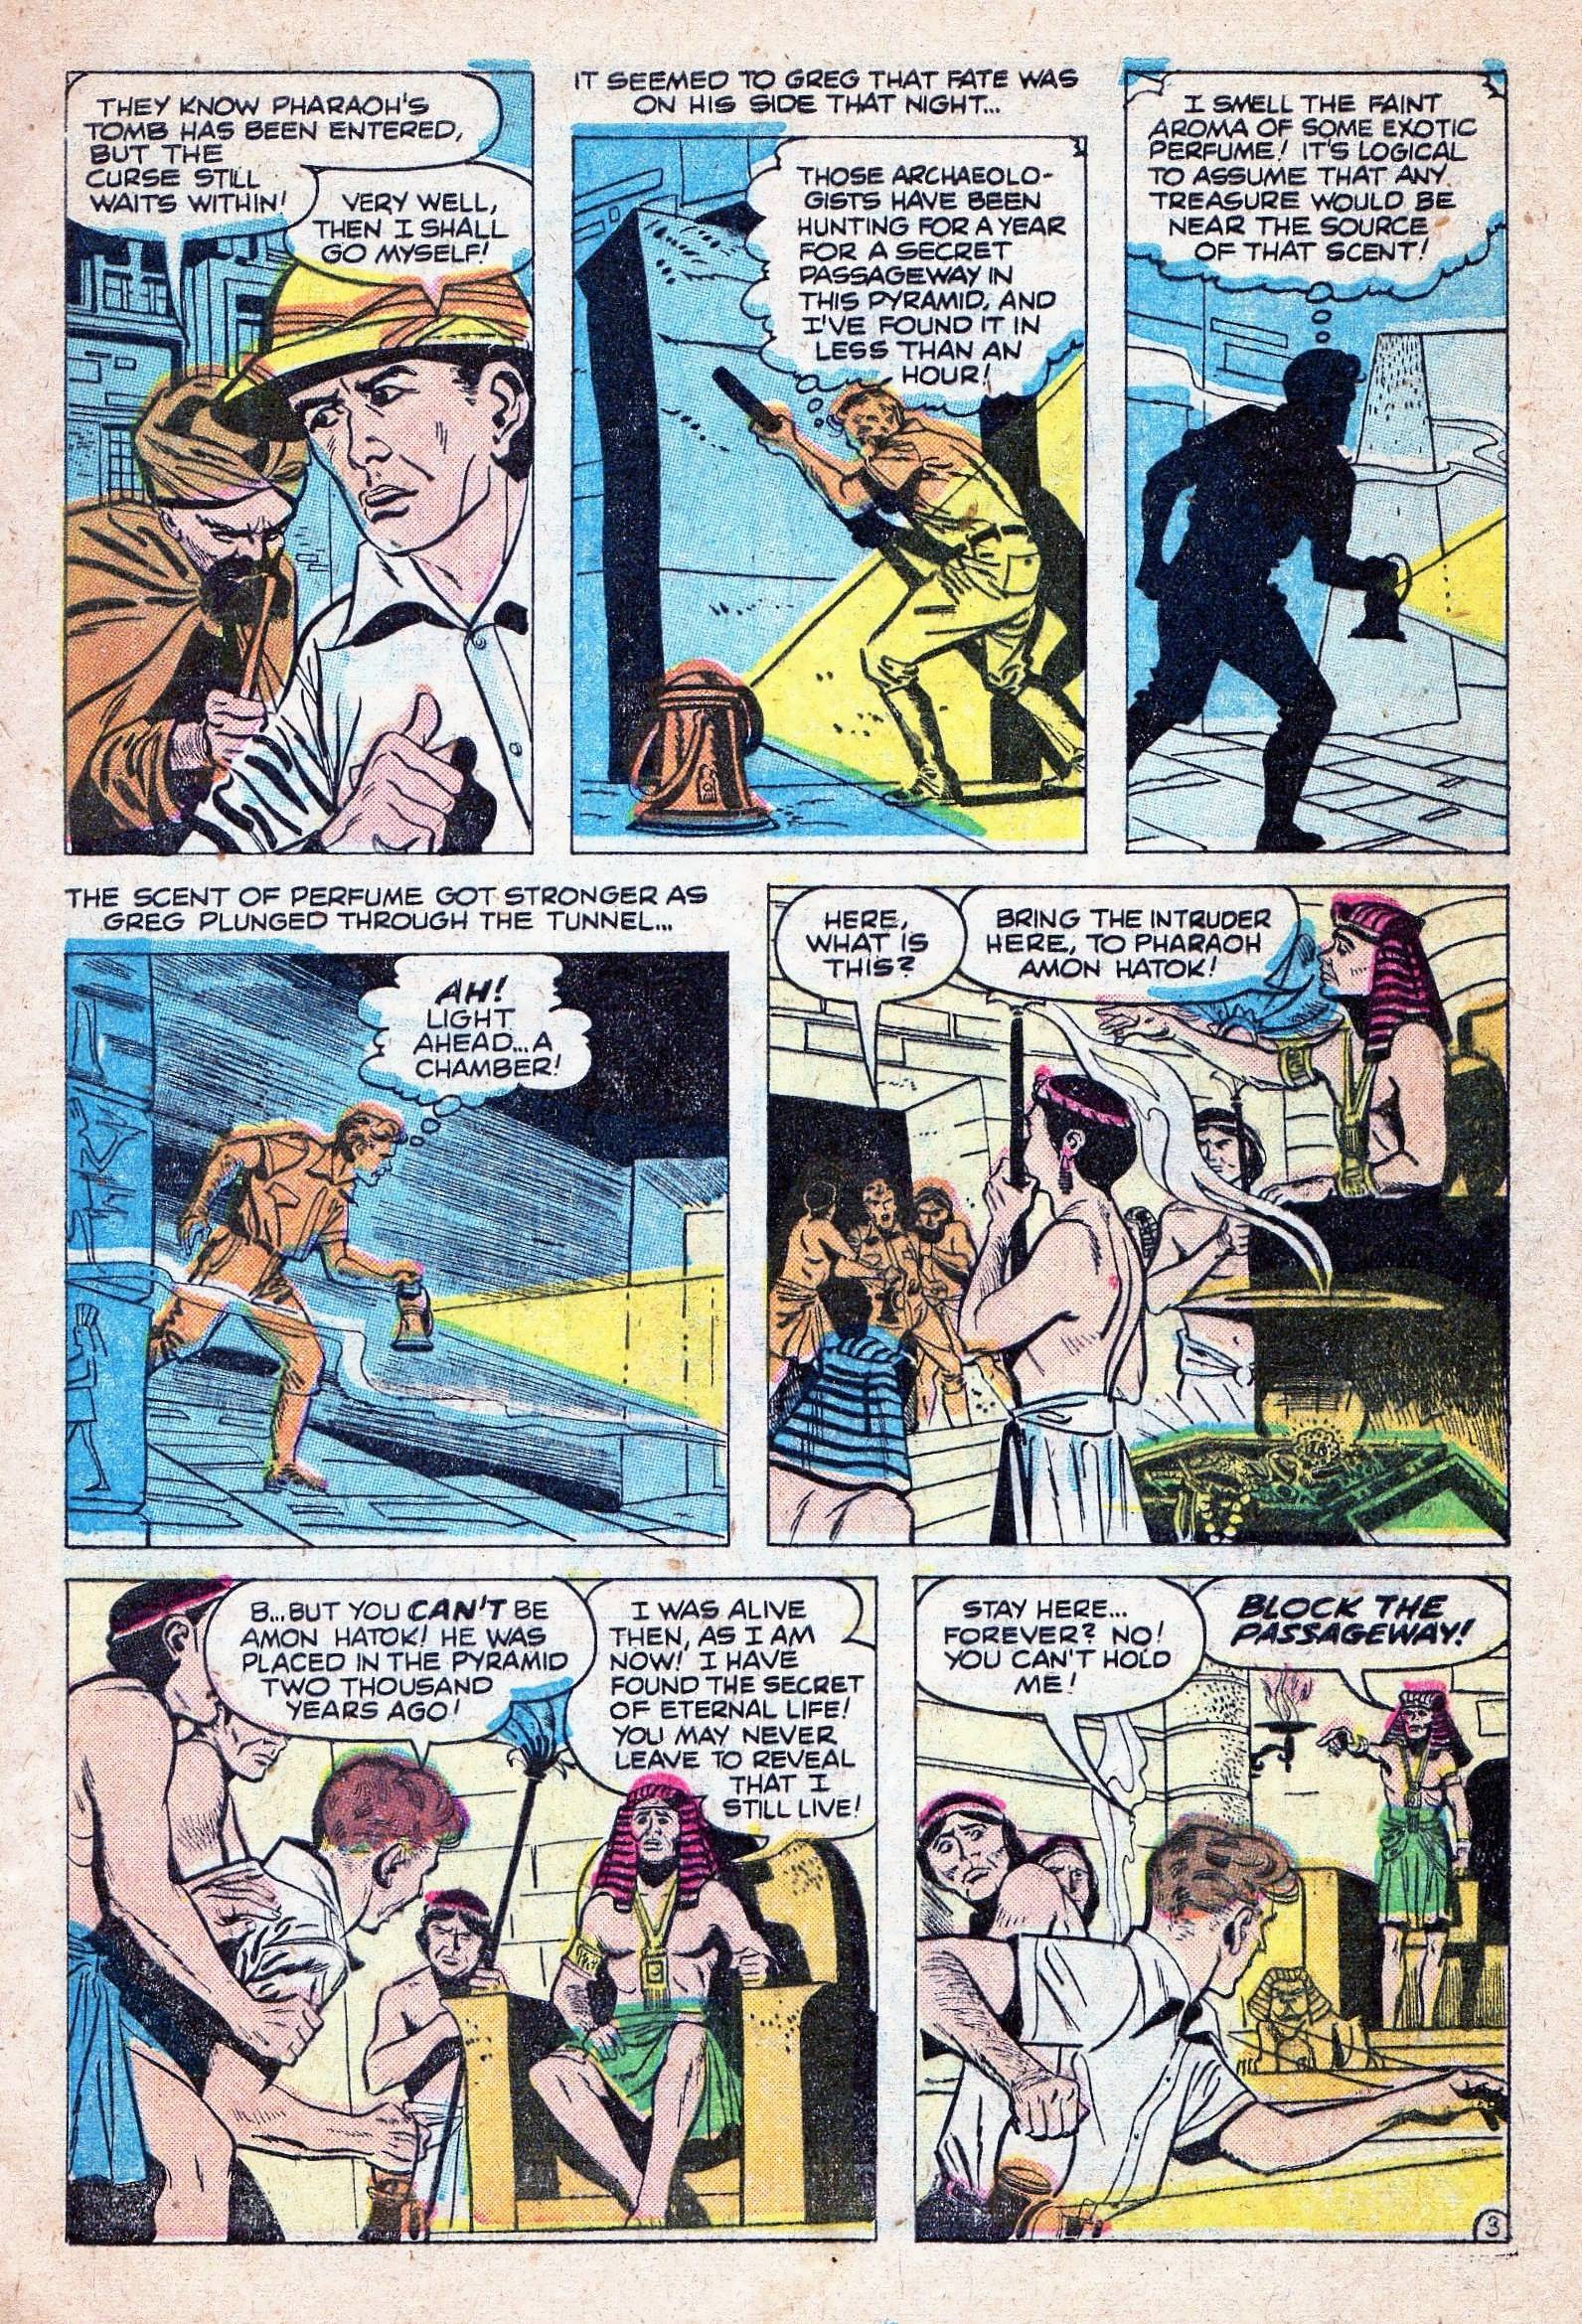 Marvel Tales (1949) 145 Page 4